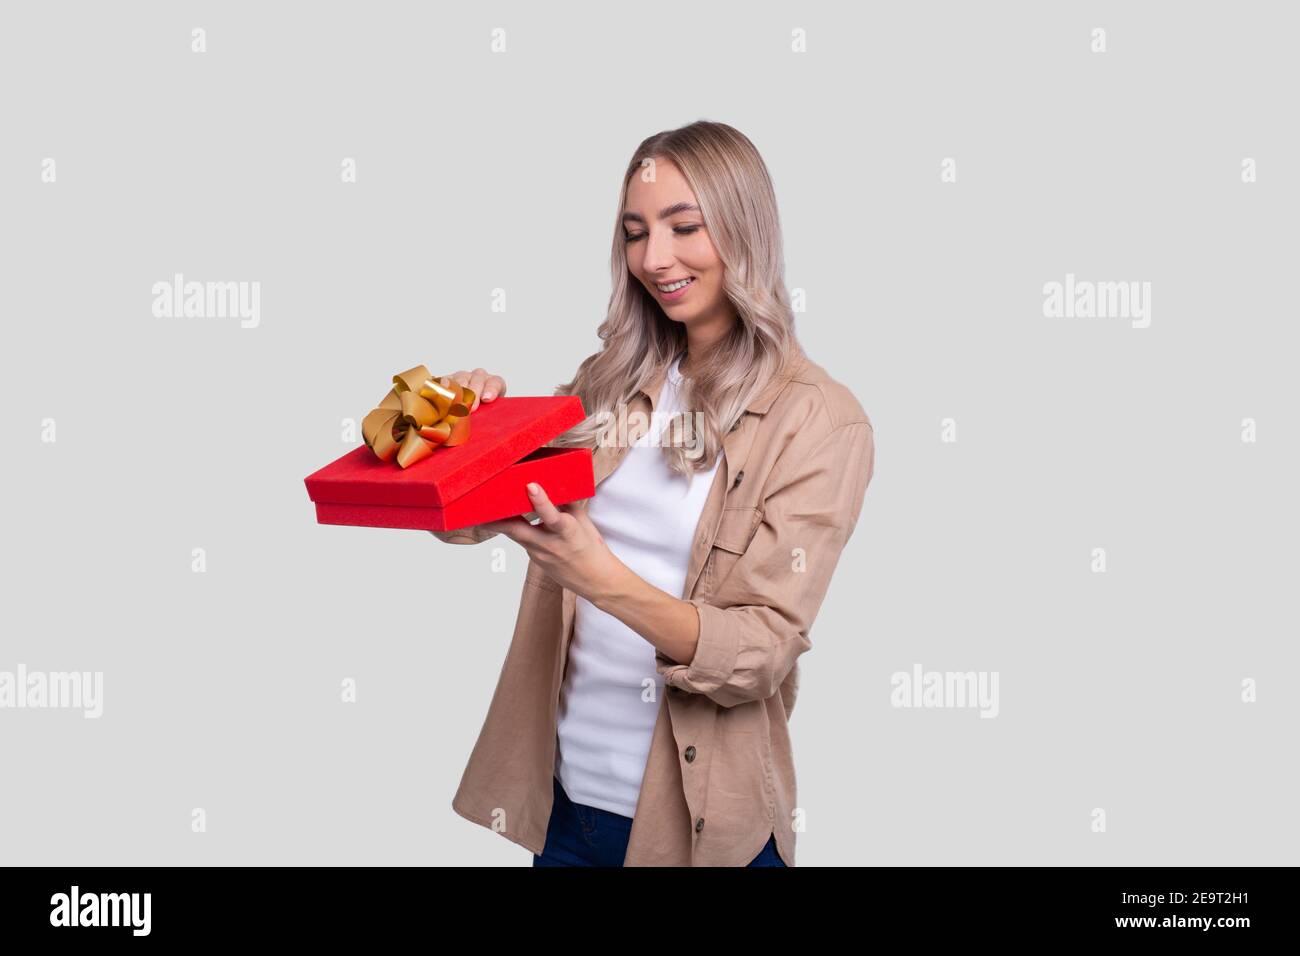 Girl Holding Present Watching Whats inside. Girl Holding Gift. Stock Photo